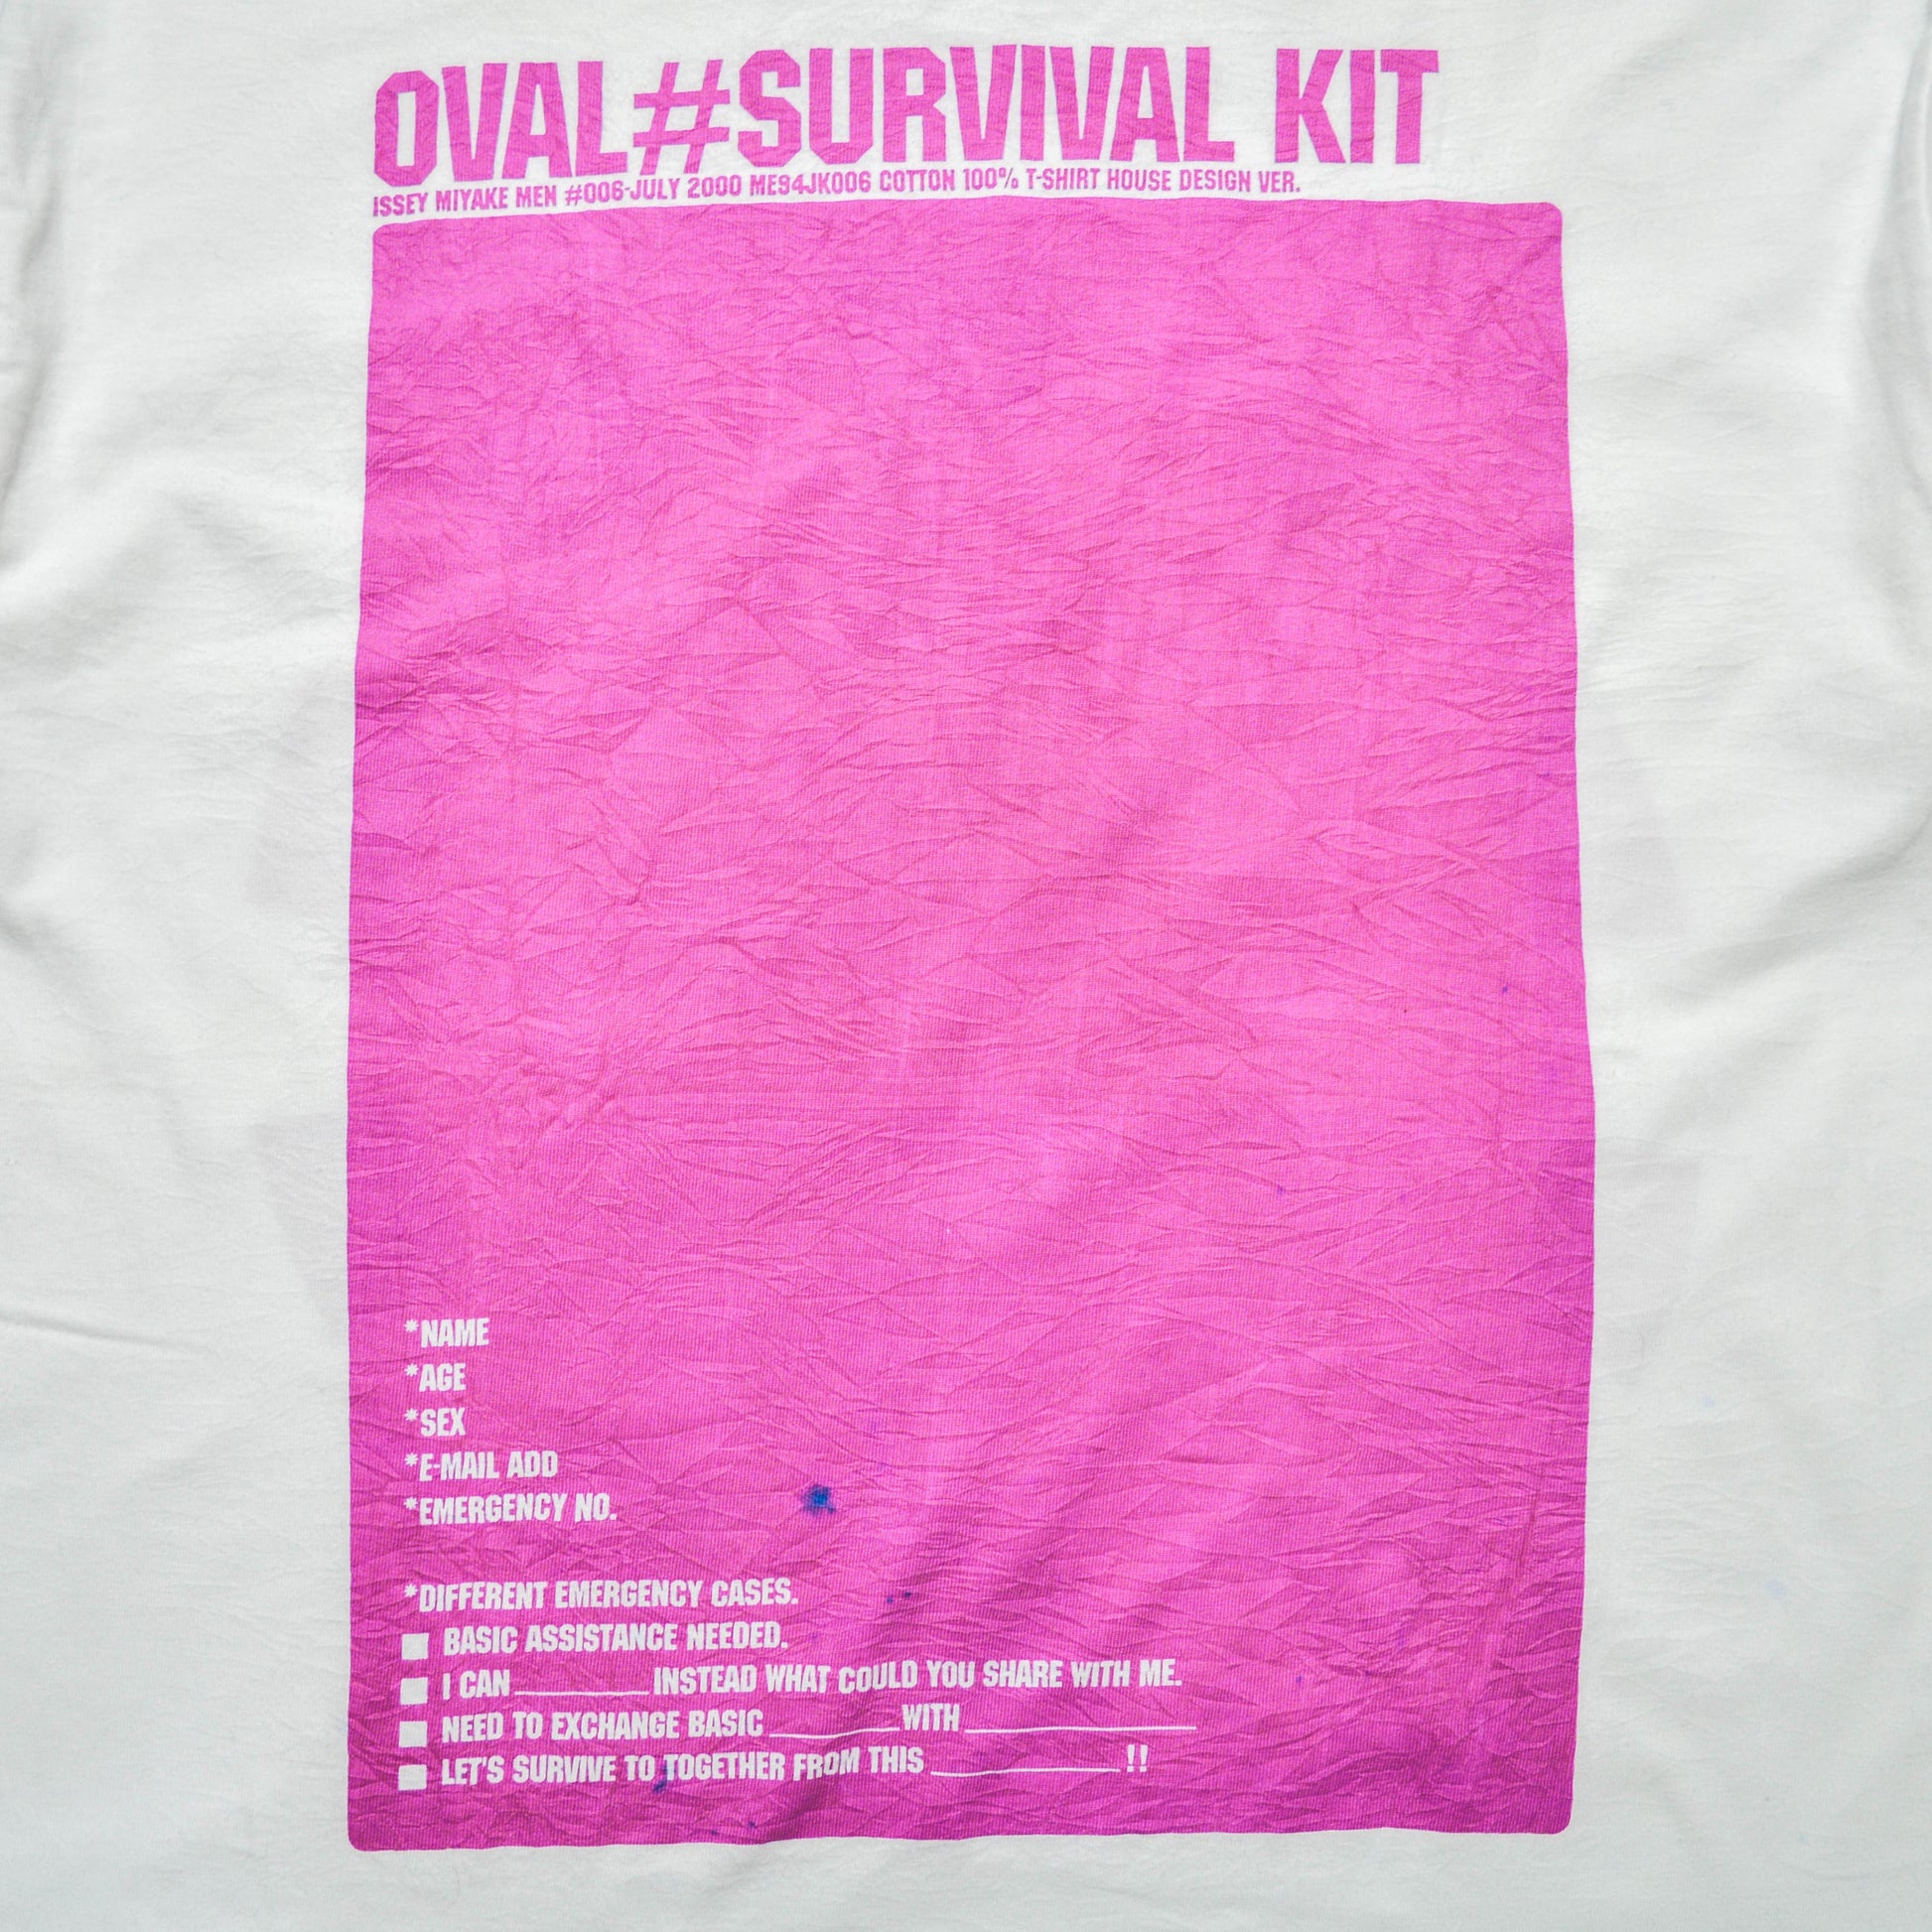 Issey Miyake Men A/W2000 Oval # Survival Kit T-shirt (S~M)